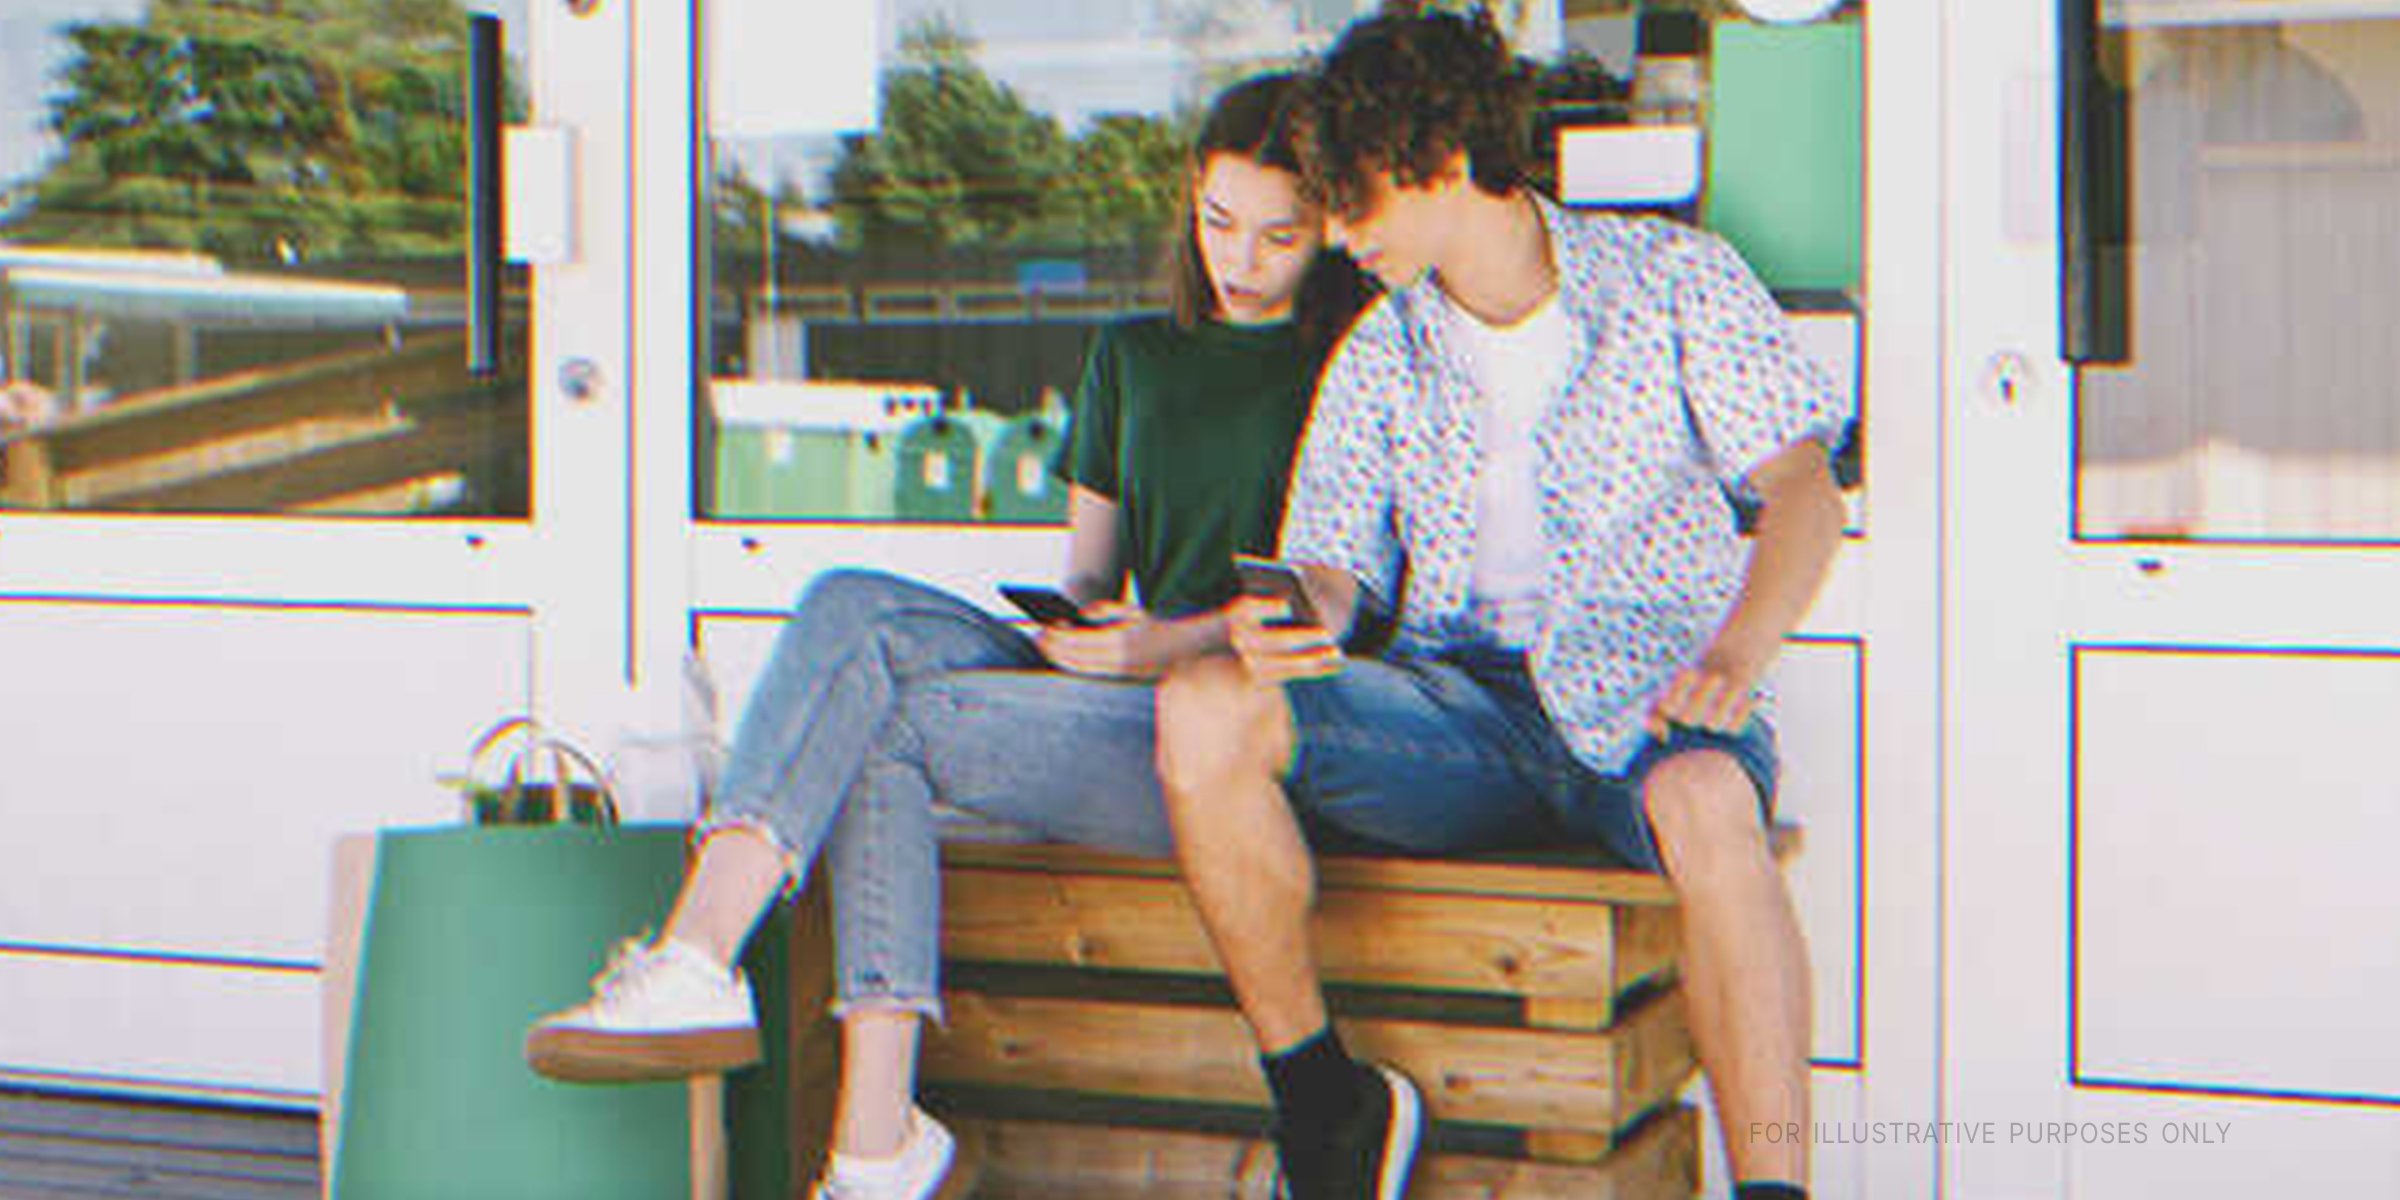 A boy and girl sitting outdoors and looking at a phone screen | Source: Shutterstock